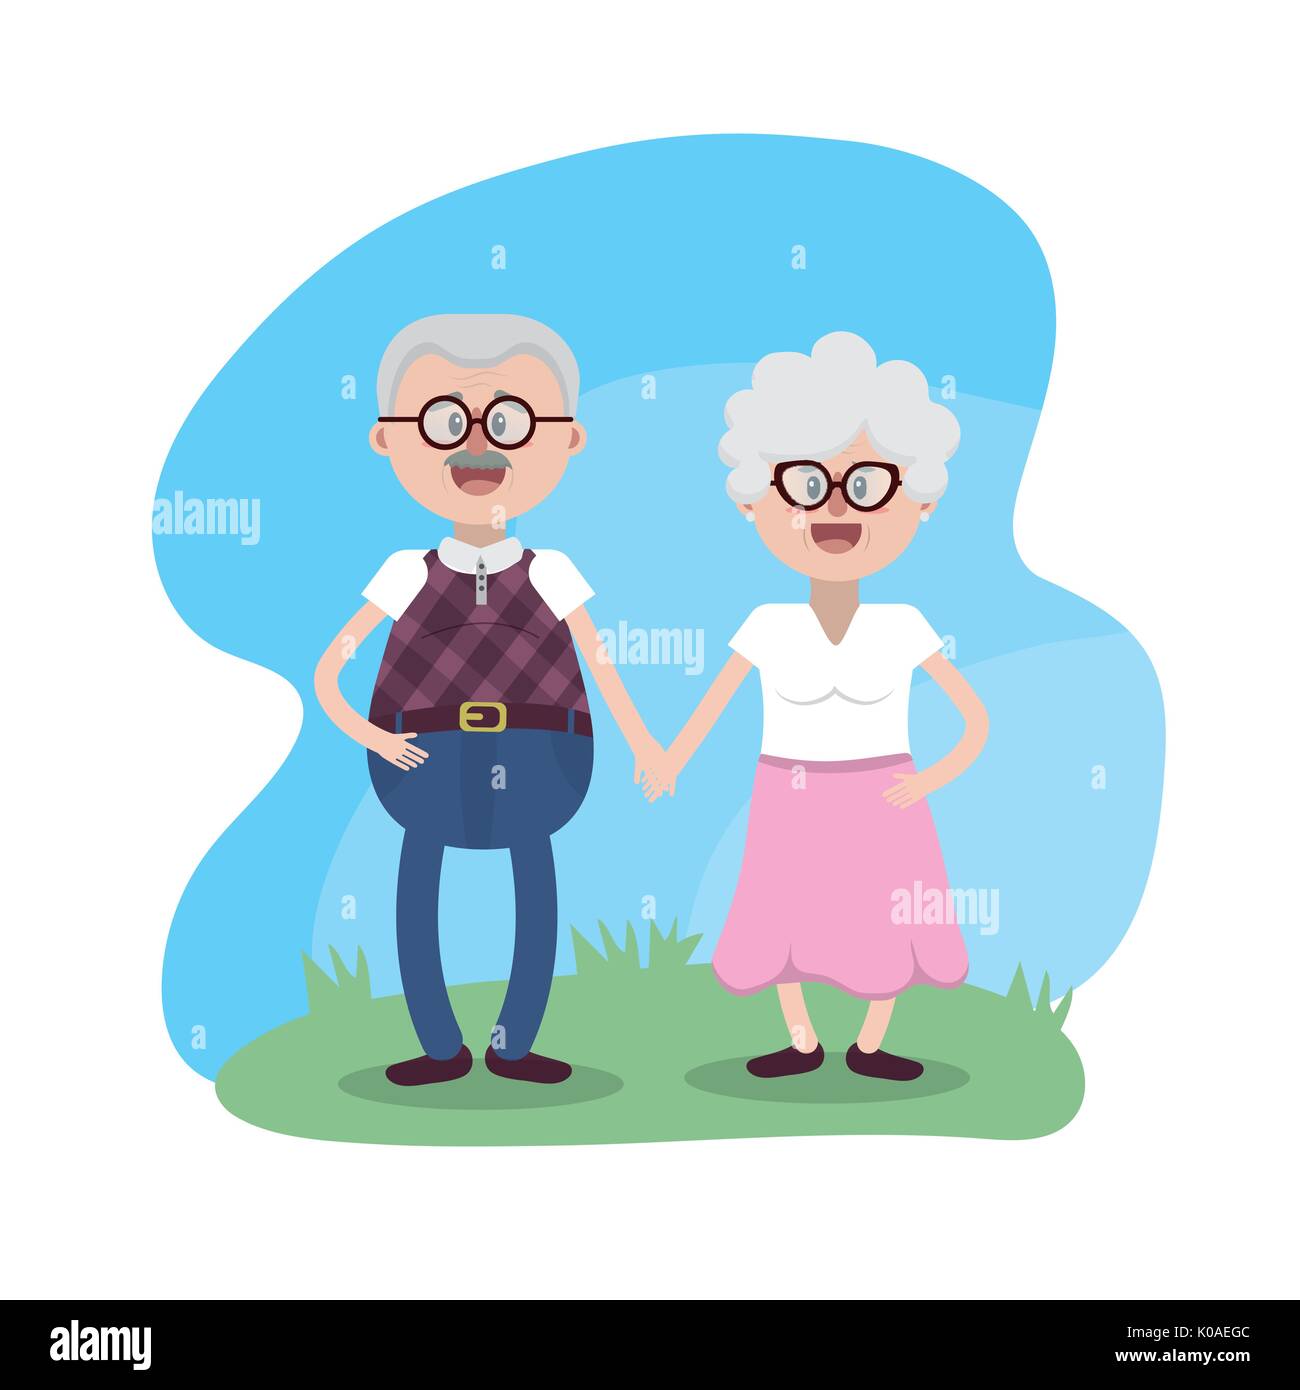 grandparent together with glasses and hairstyle Stock Vector